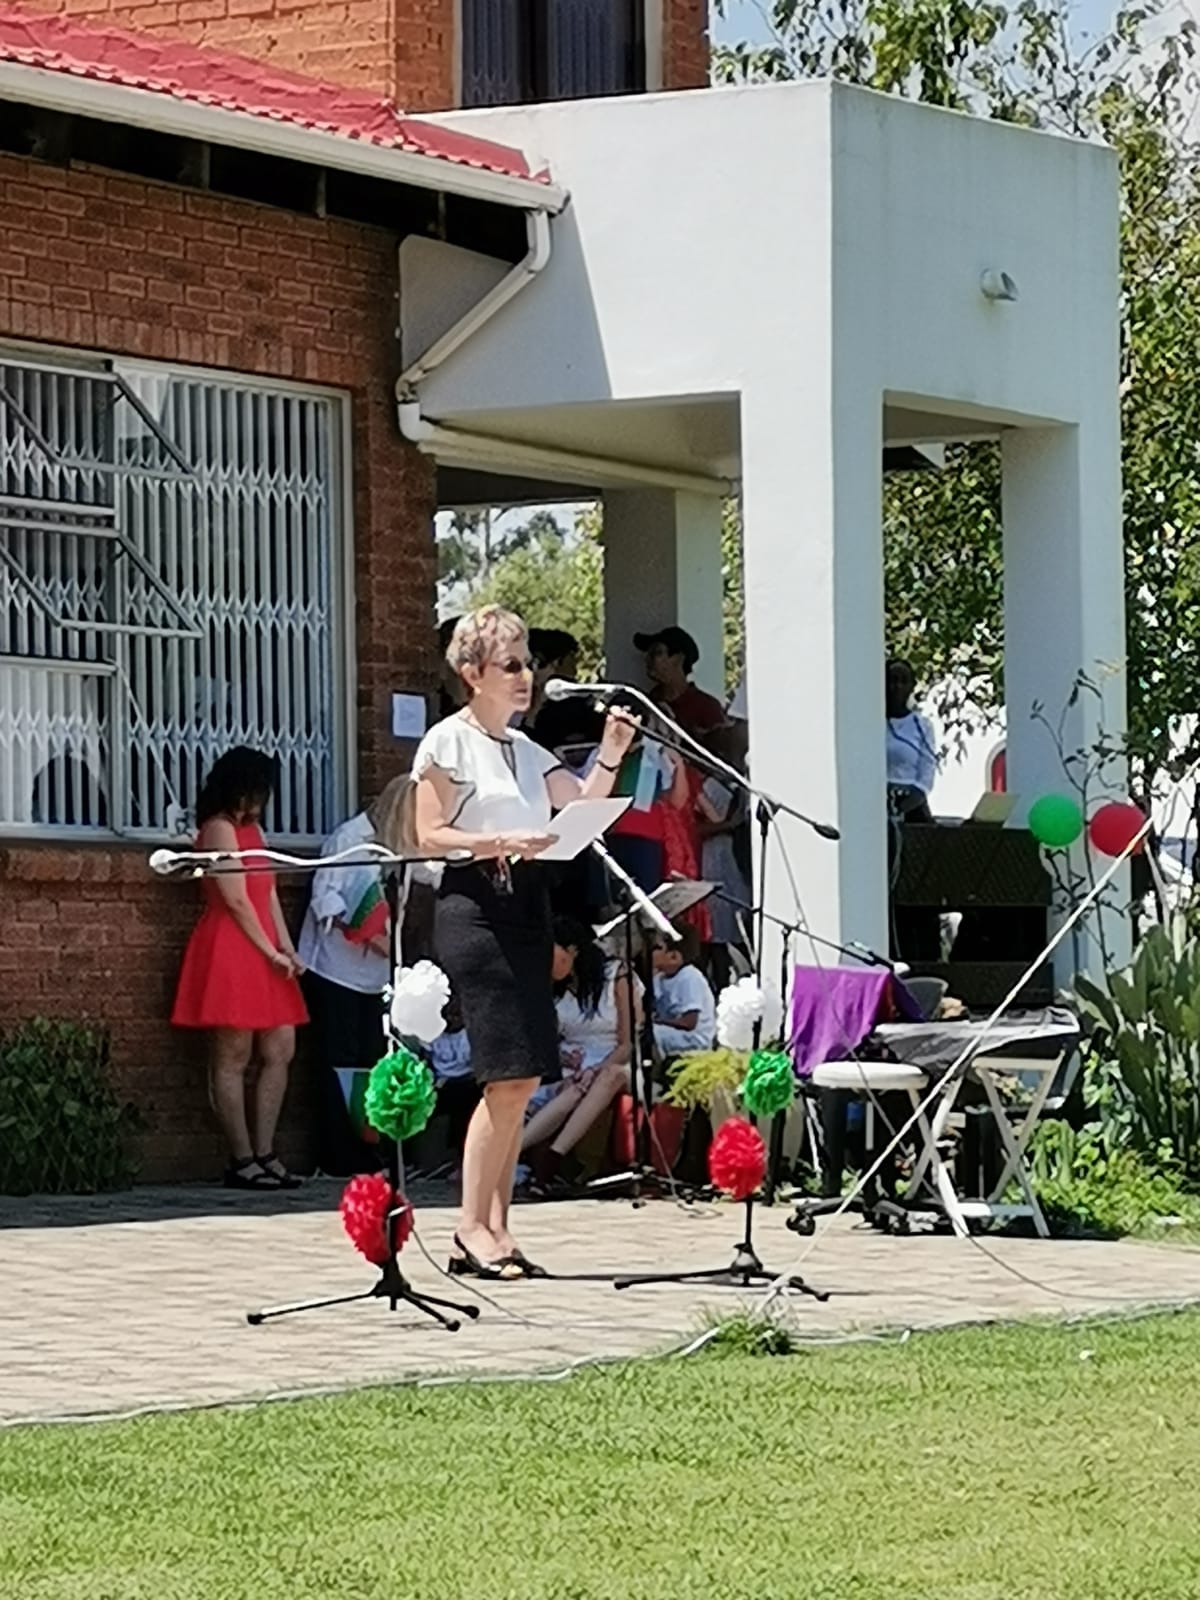 Celebration of the National Day of the Republic of Bulgaria - the 3rd of March, at the Bulgarian Cultural Club in Midrand